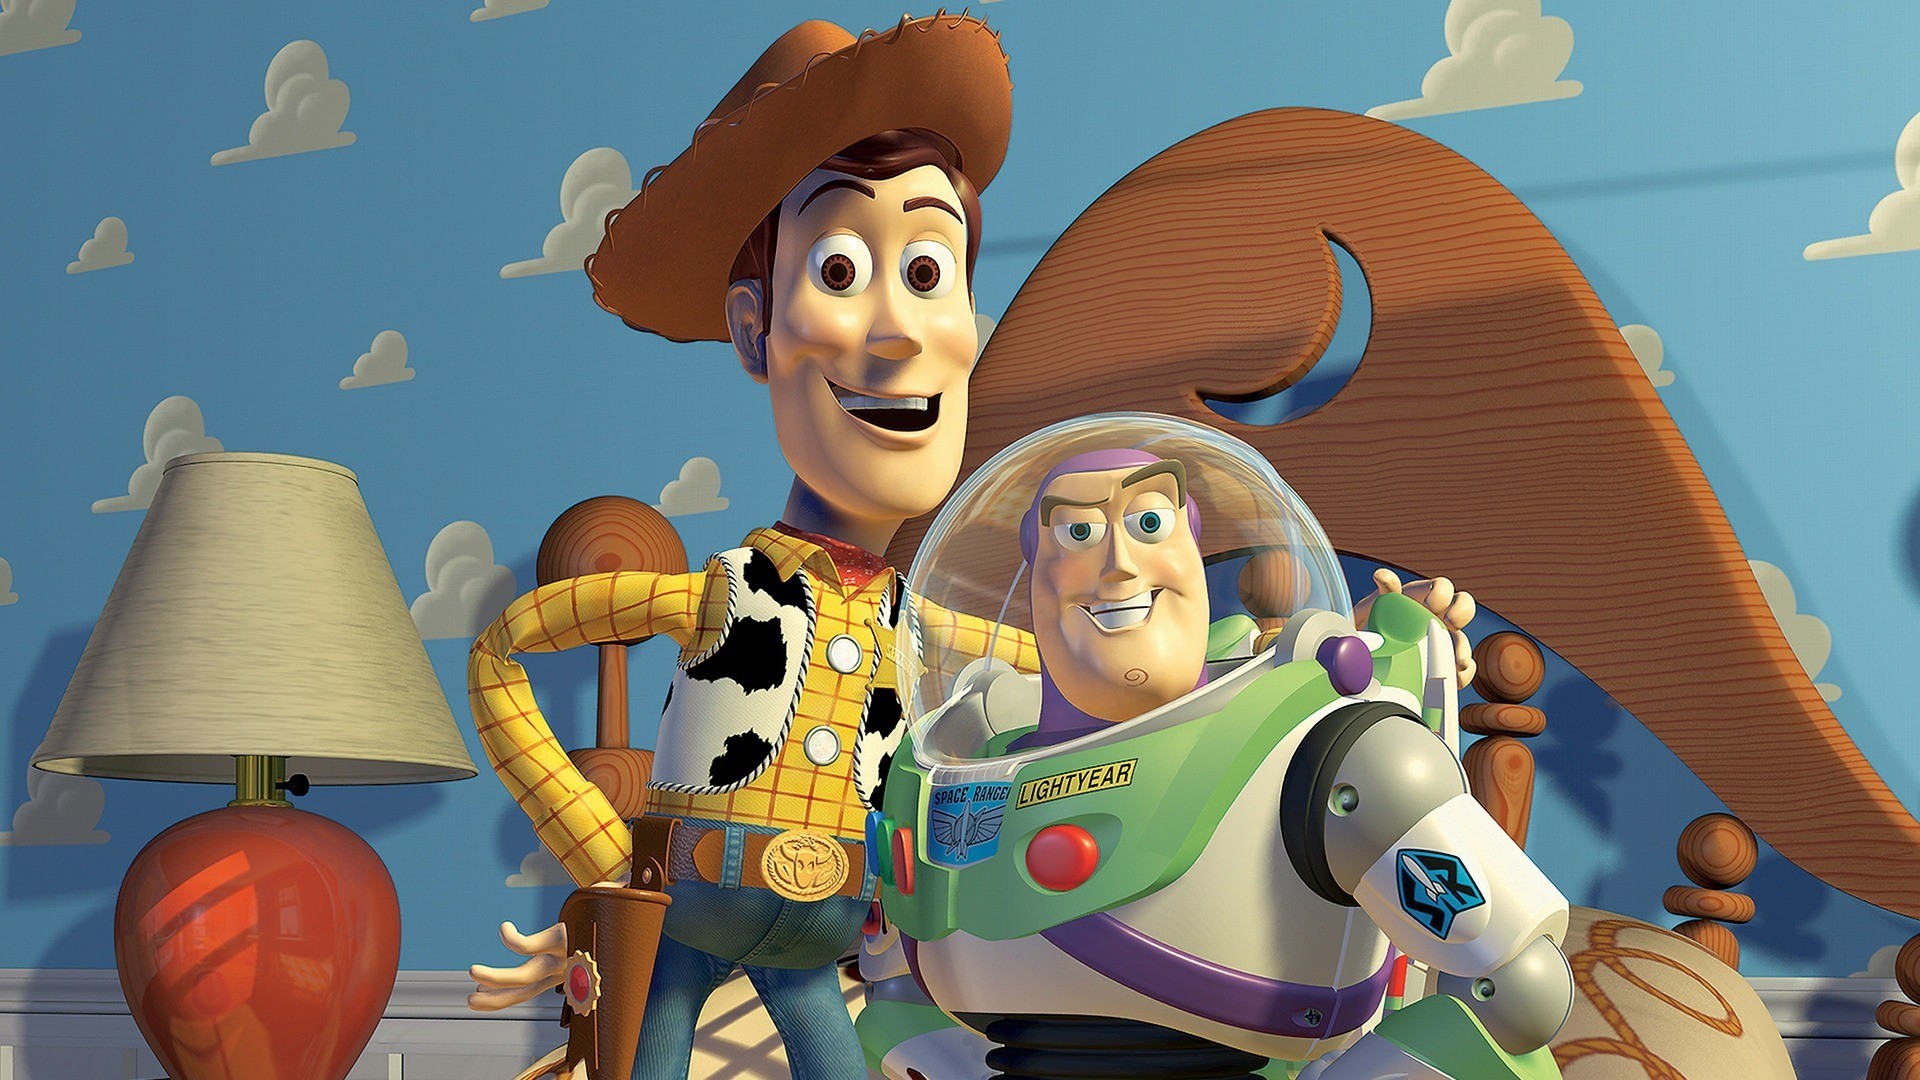 toy_story